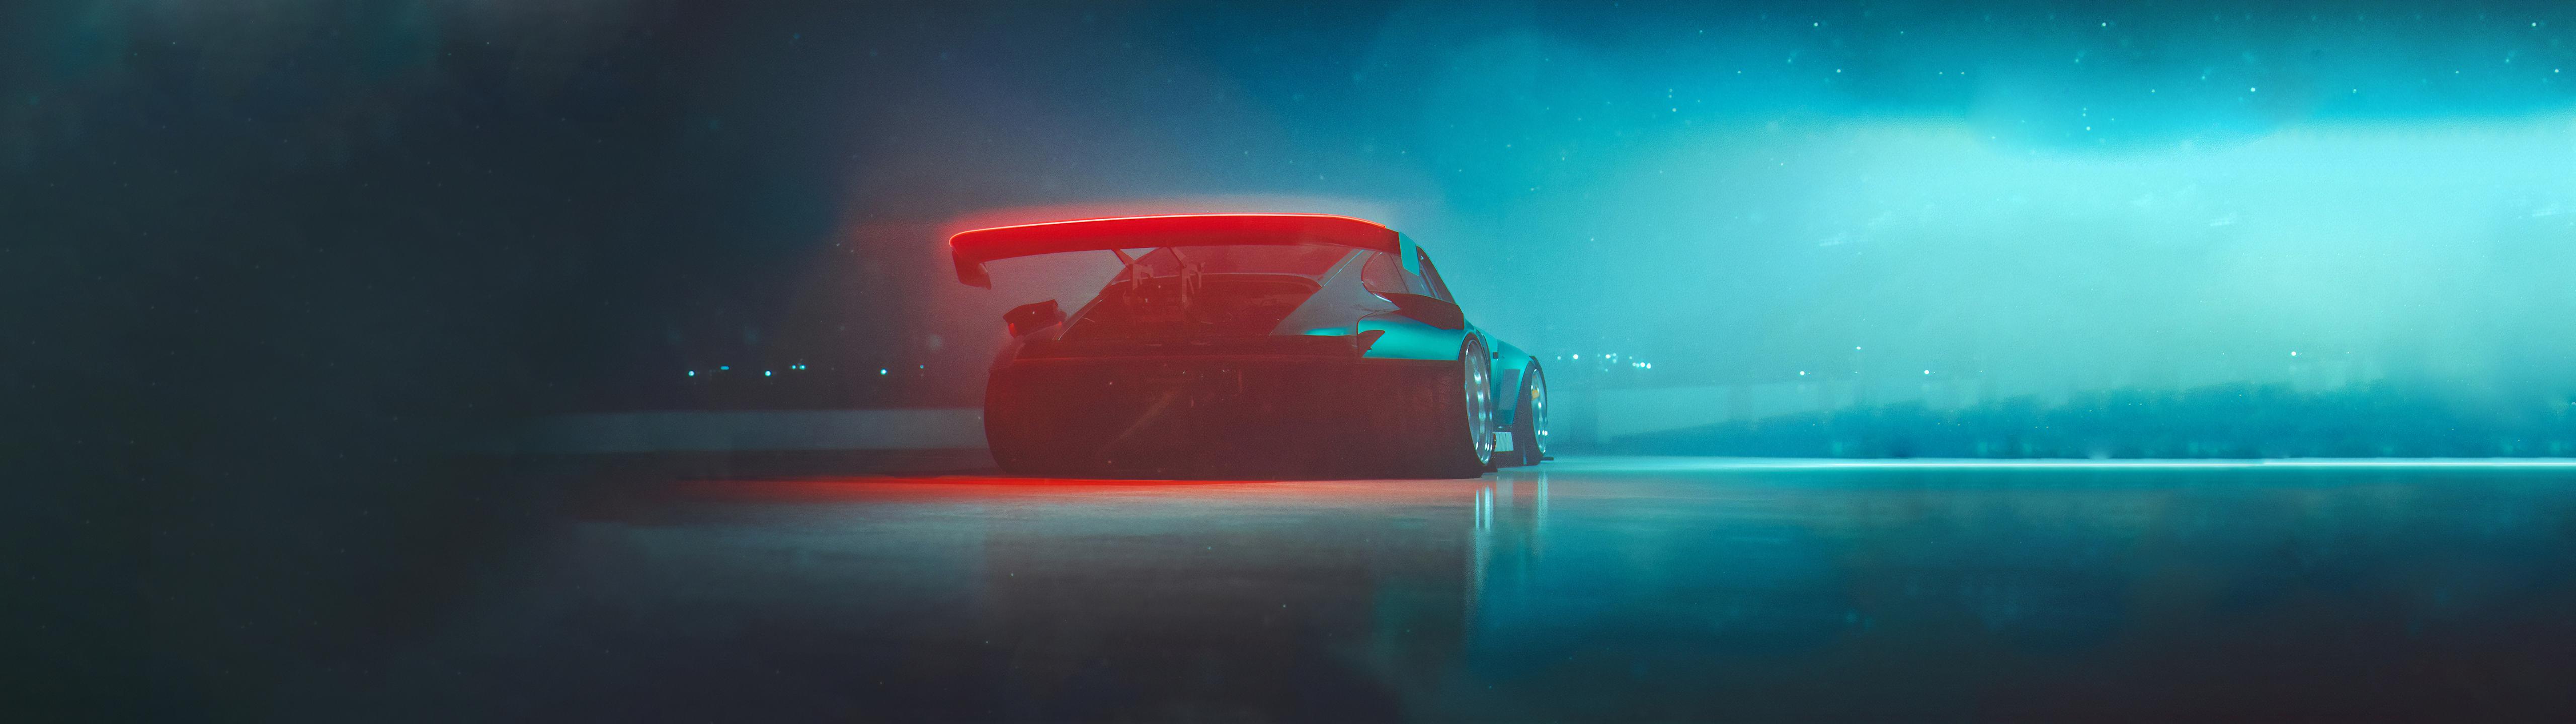 A car in the middle of the road with red and blue lights - 5120x1440